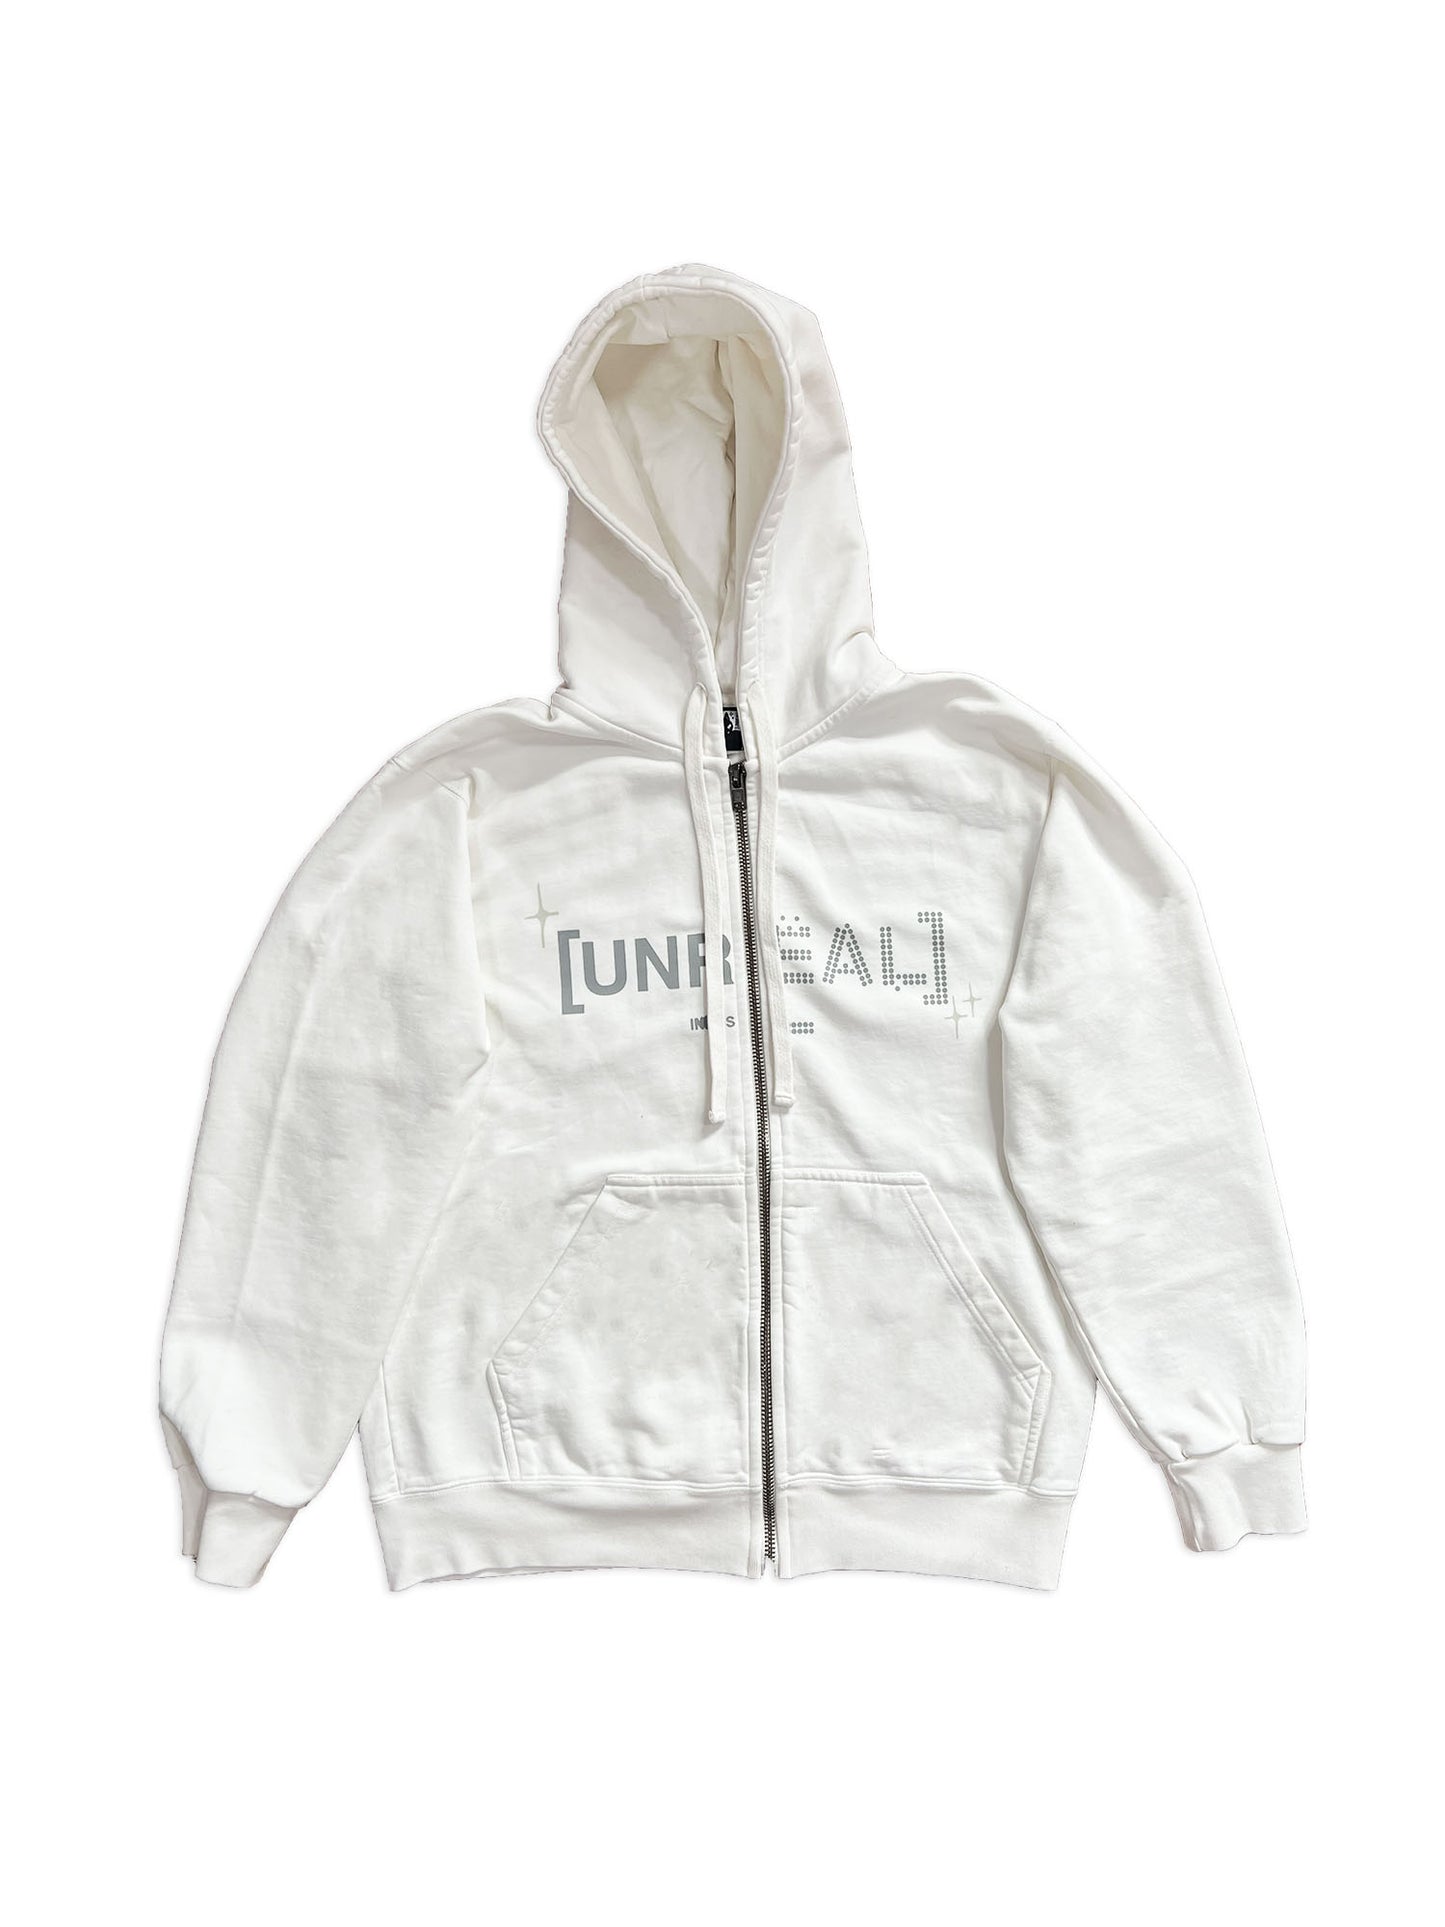 UNREAL Signature Off-White Zipup